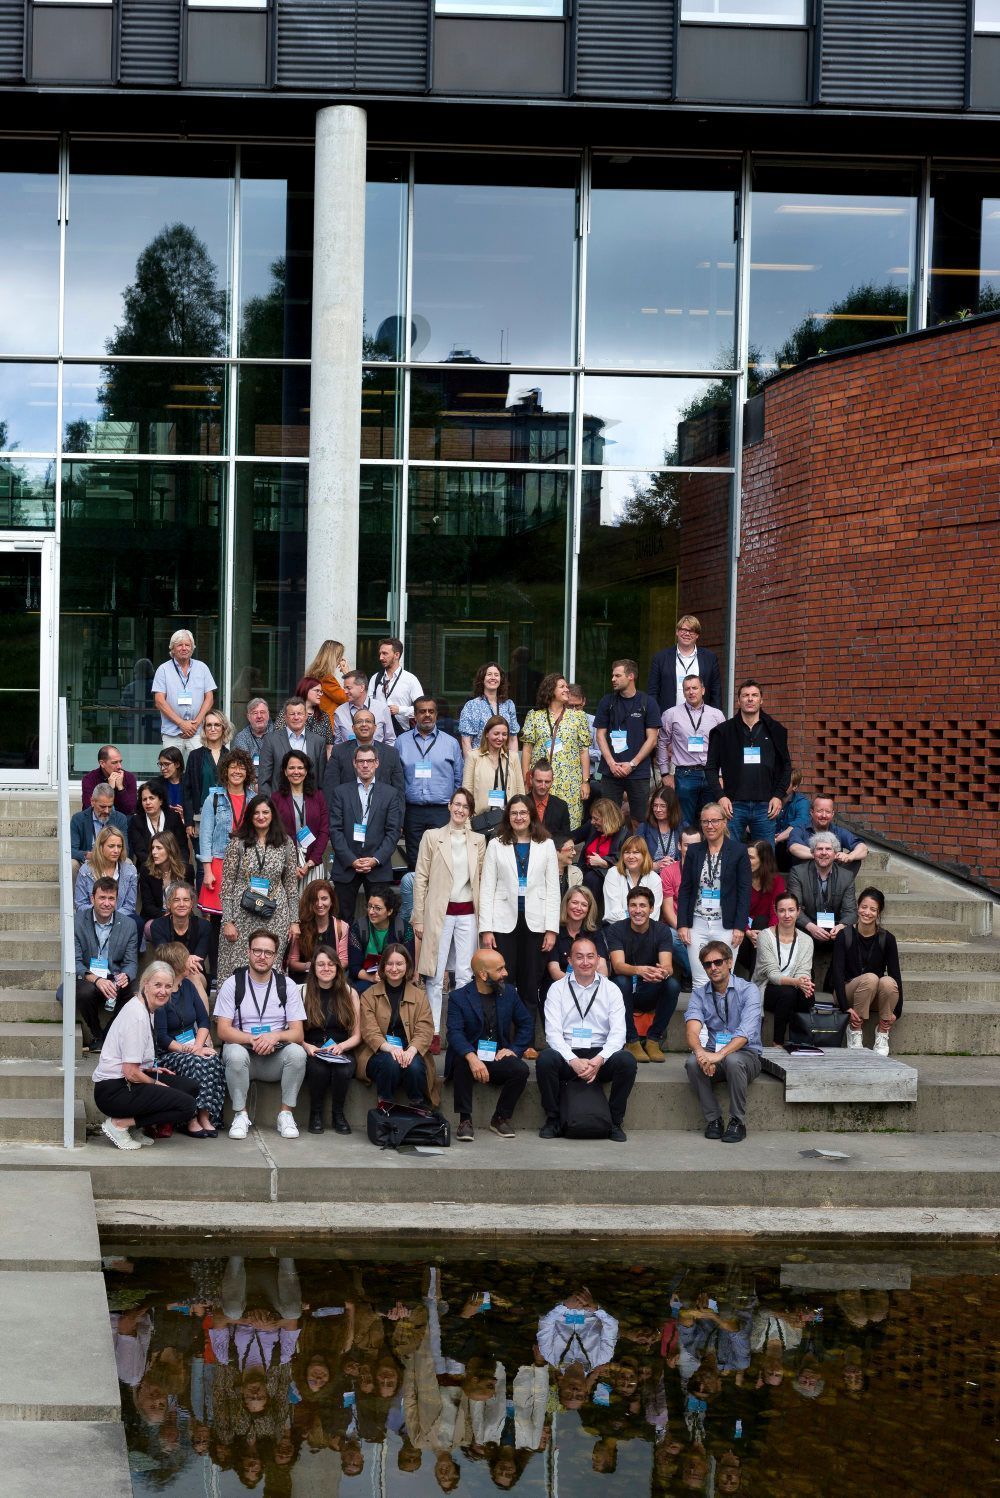 &amp;#160;
Very good atmosphere among the participants in the Gravitate-Health interactive workshop in Oslo June 29 - 30, 2022.